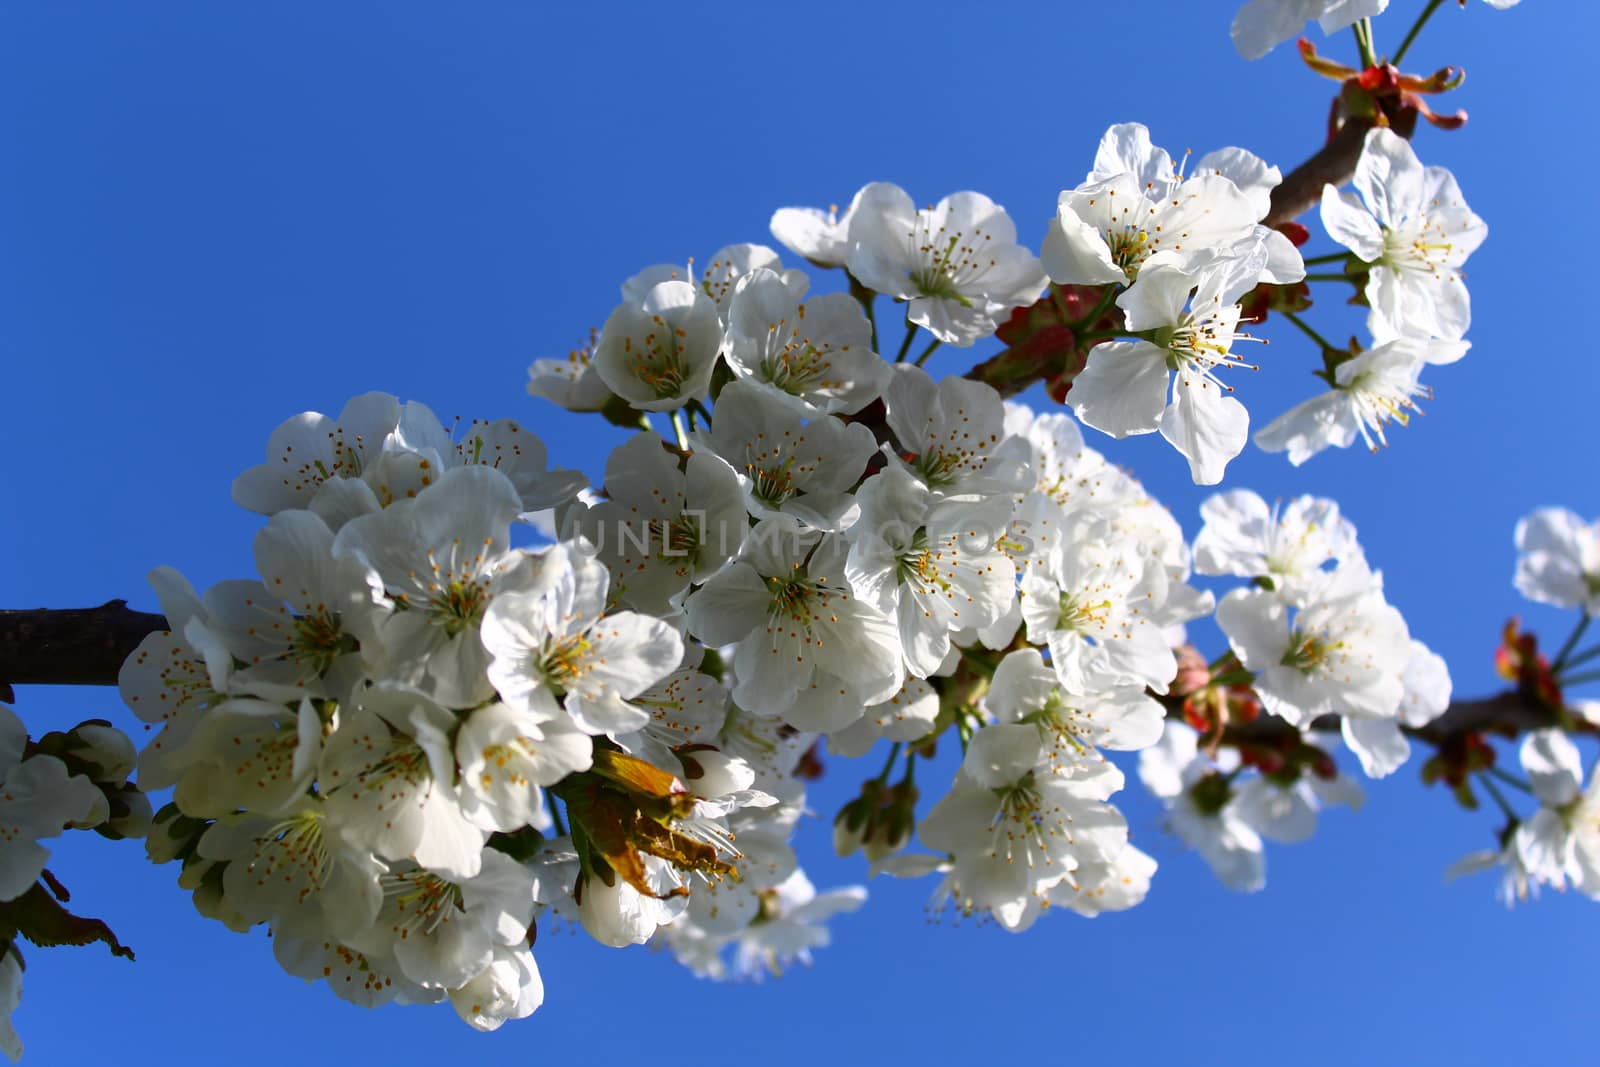 The picture shows cherry blossoms in the spring.